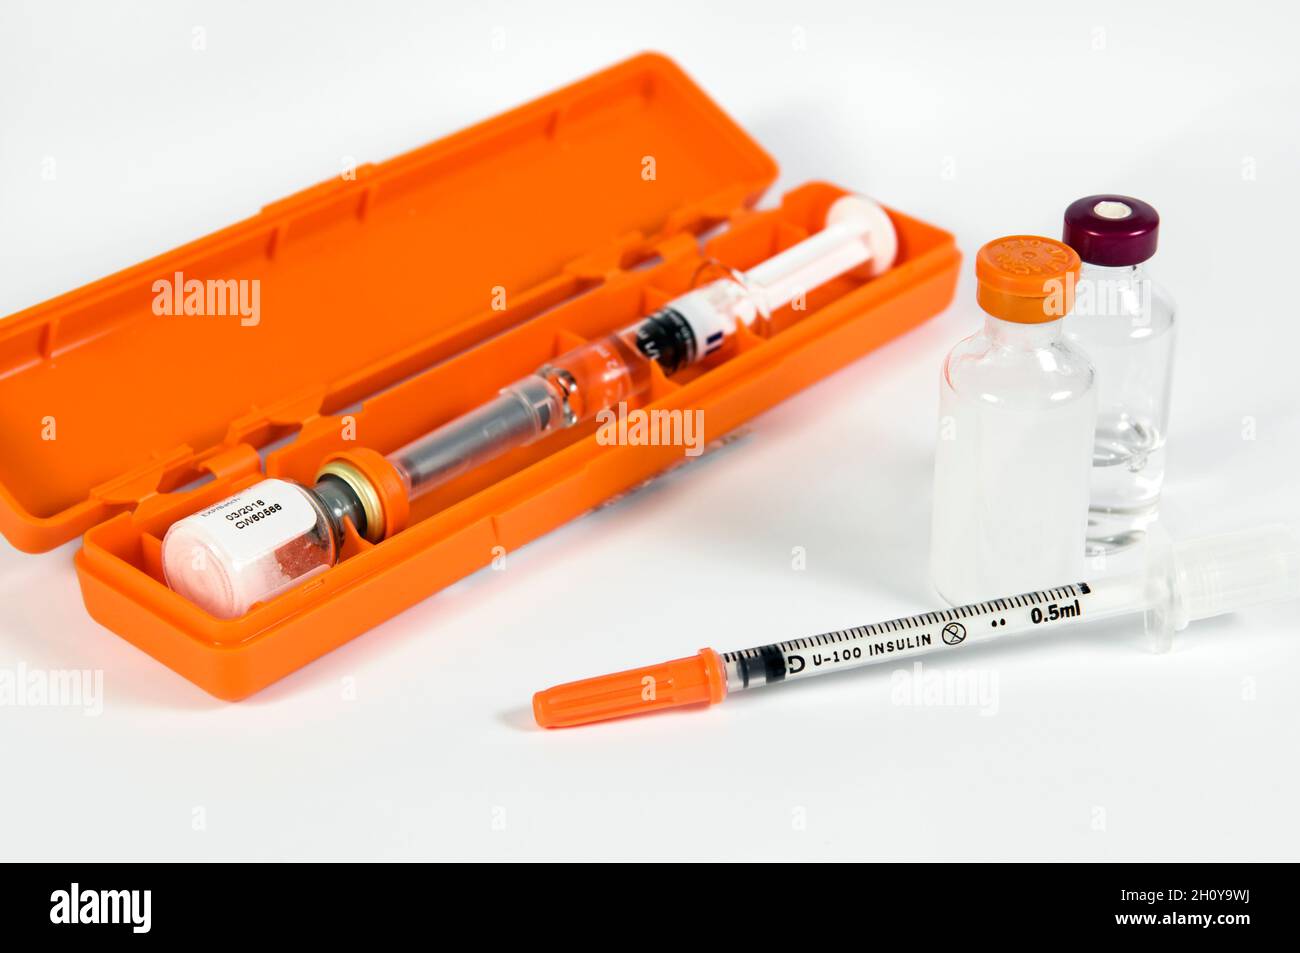 Diabetic insulin injection kit. Glucagon hydrochloride injection kit, with short and long acting vials of insulin and injection needle with safety cap Stock Photo